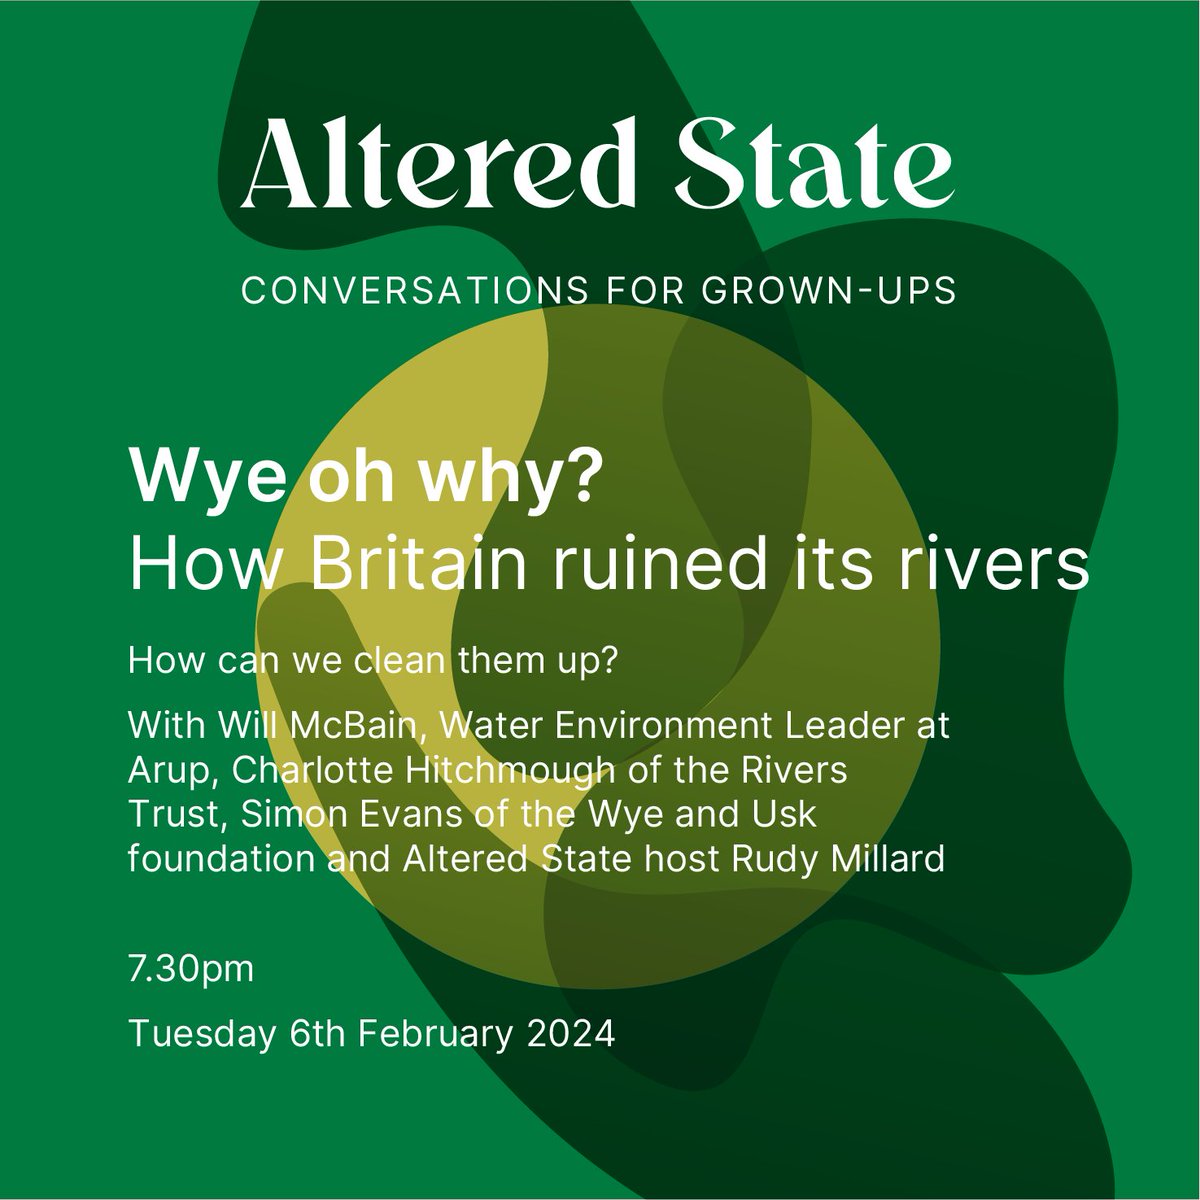 Steam coming out of your ears courtesy the #watercompanies #environmentagency & #ofwat?

We talk solutions to our #rivers crisis

Tickets headfirstbristol.co.uk/whats-on/hen-c…

#bristol #talks #green #greenfuture #britainsrivers #profiteering #alteredstate #wyeohwhy #environment #riverhealth